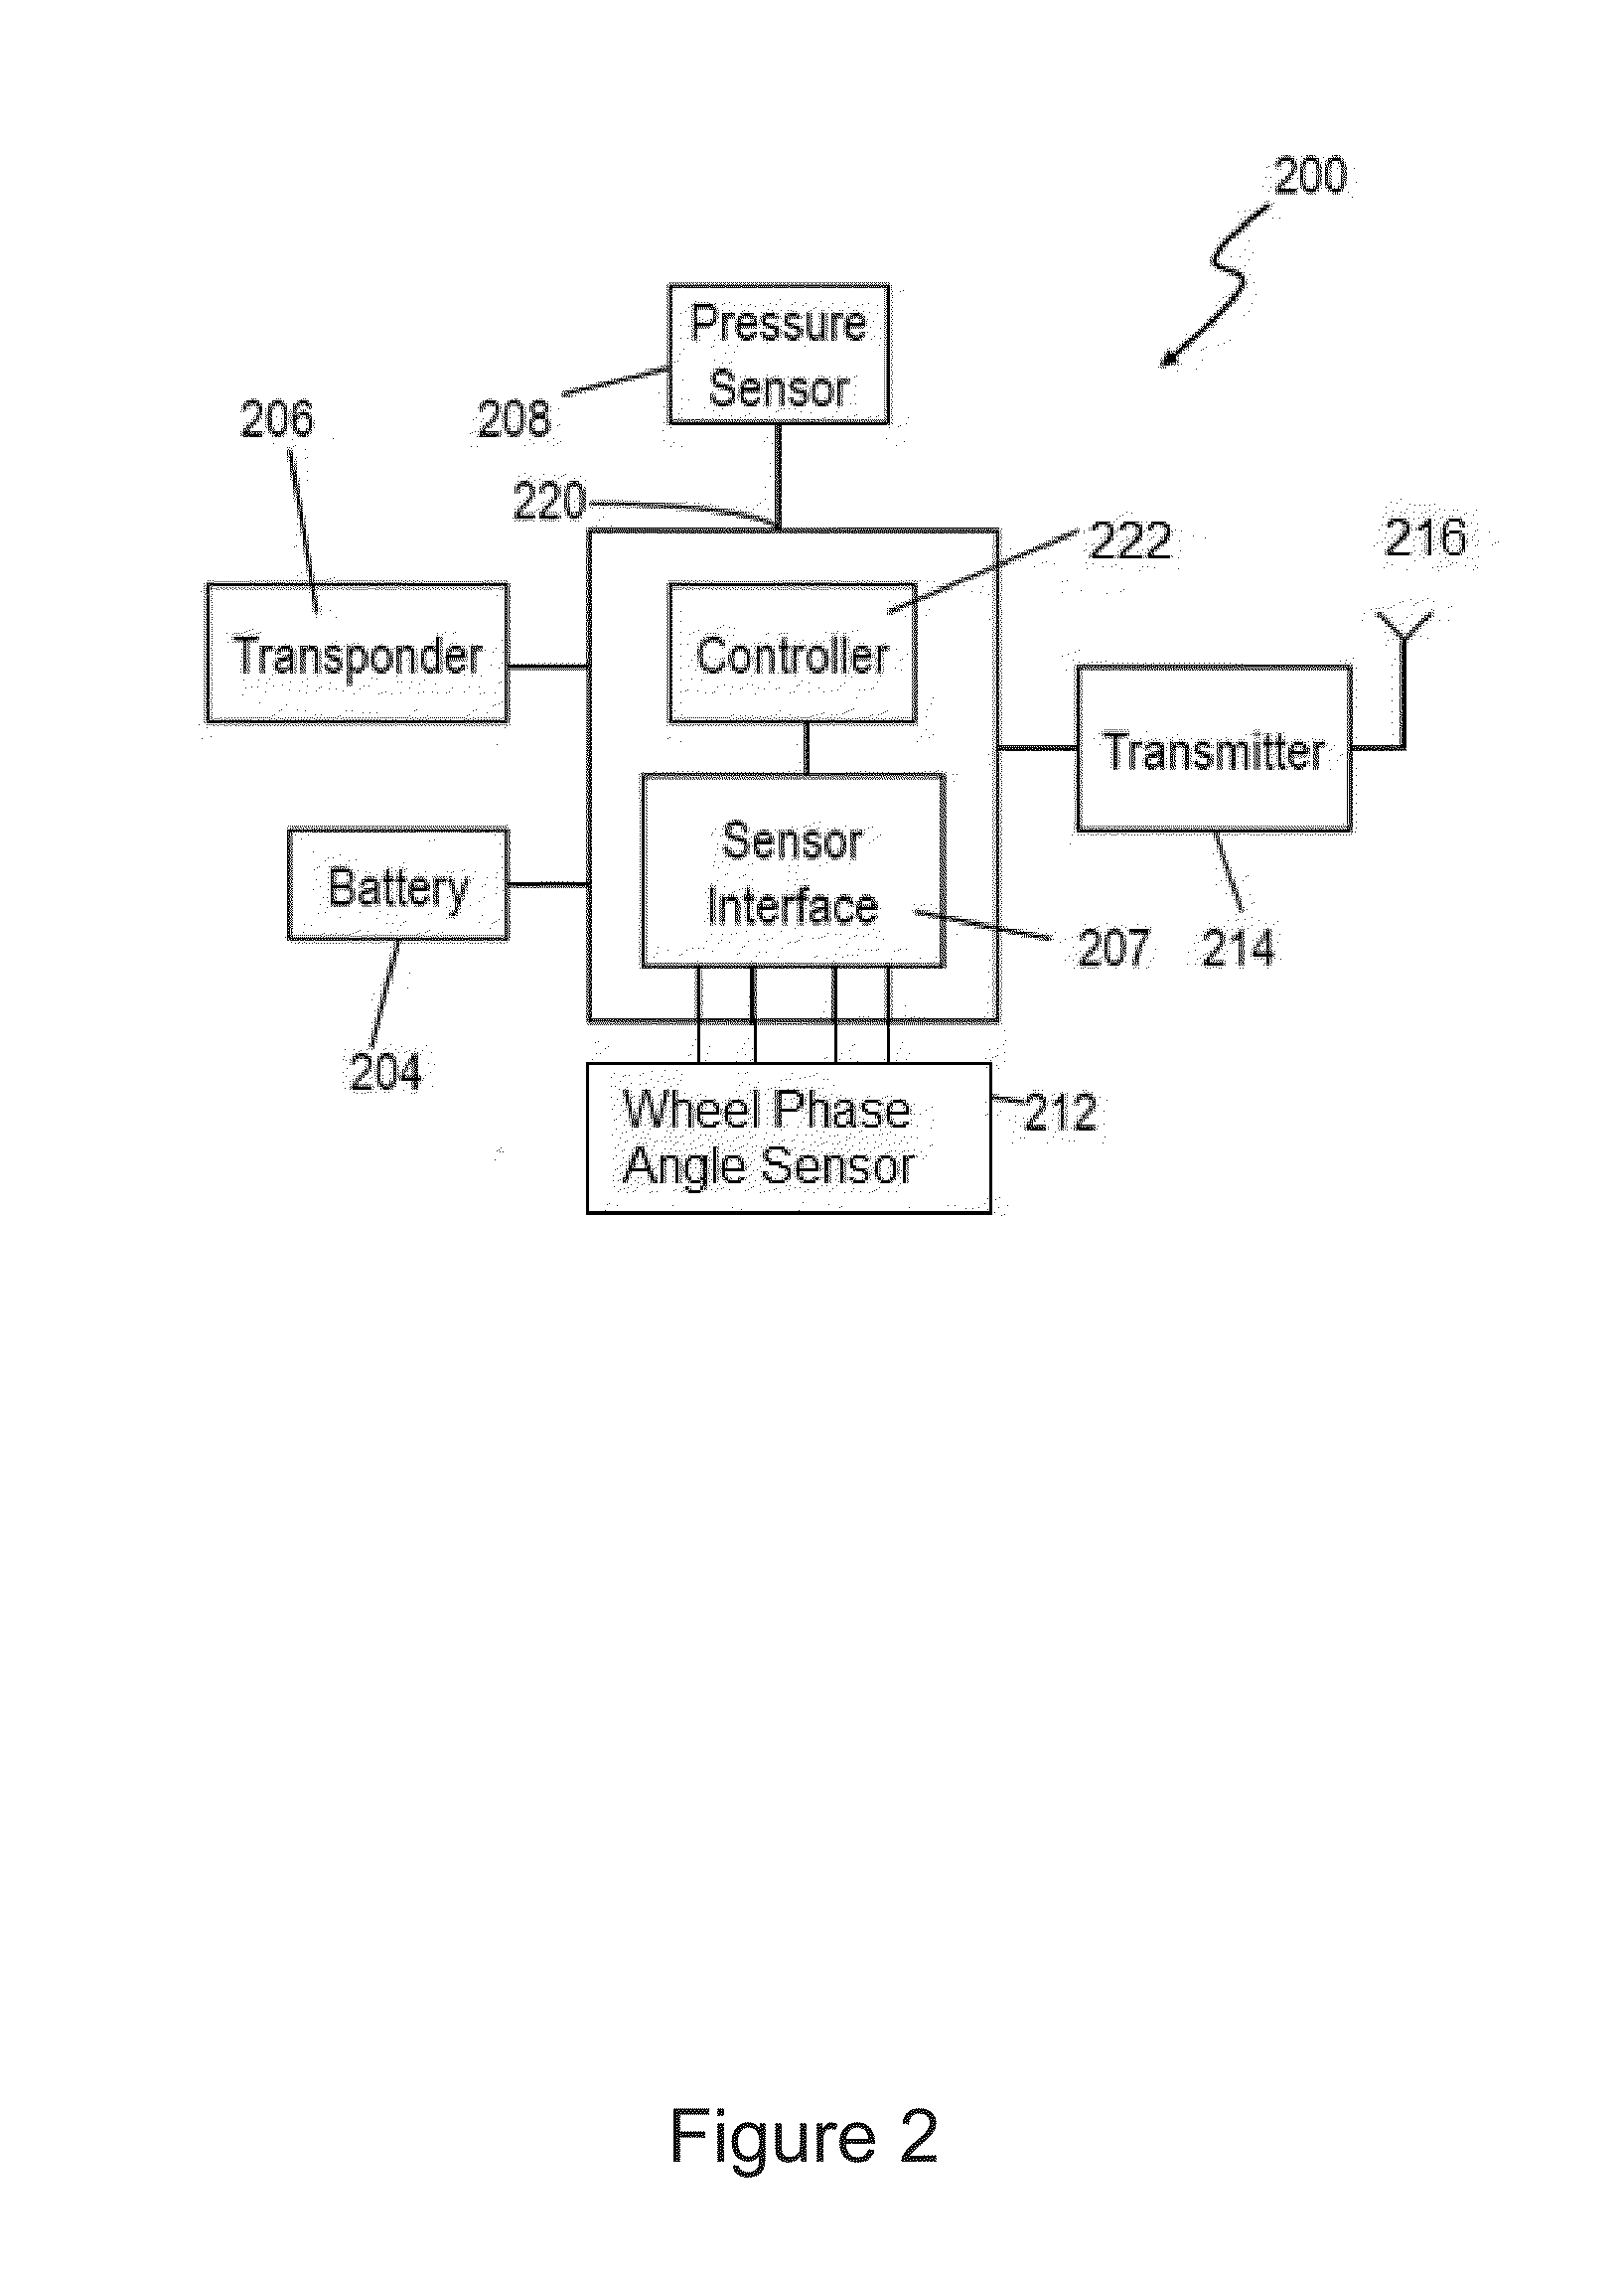 System and method for performing auto-location of a tire pressure monitoring sensor arranged with a vehicle wheel using confidence interval analysis and change of wheel direction